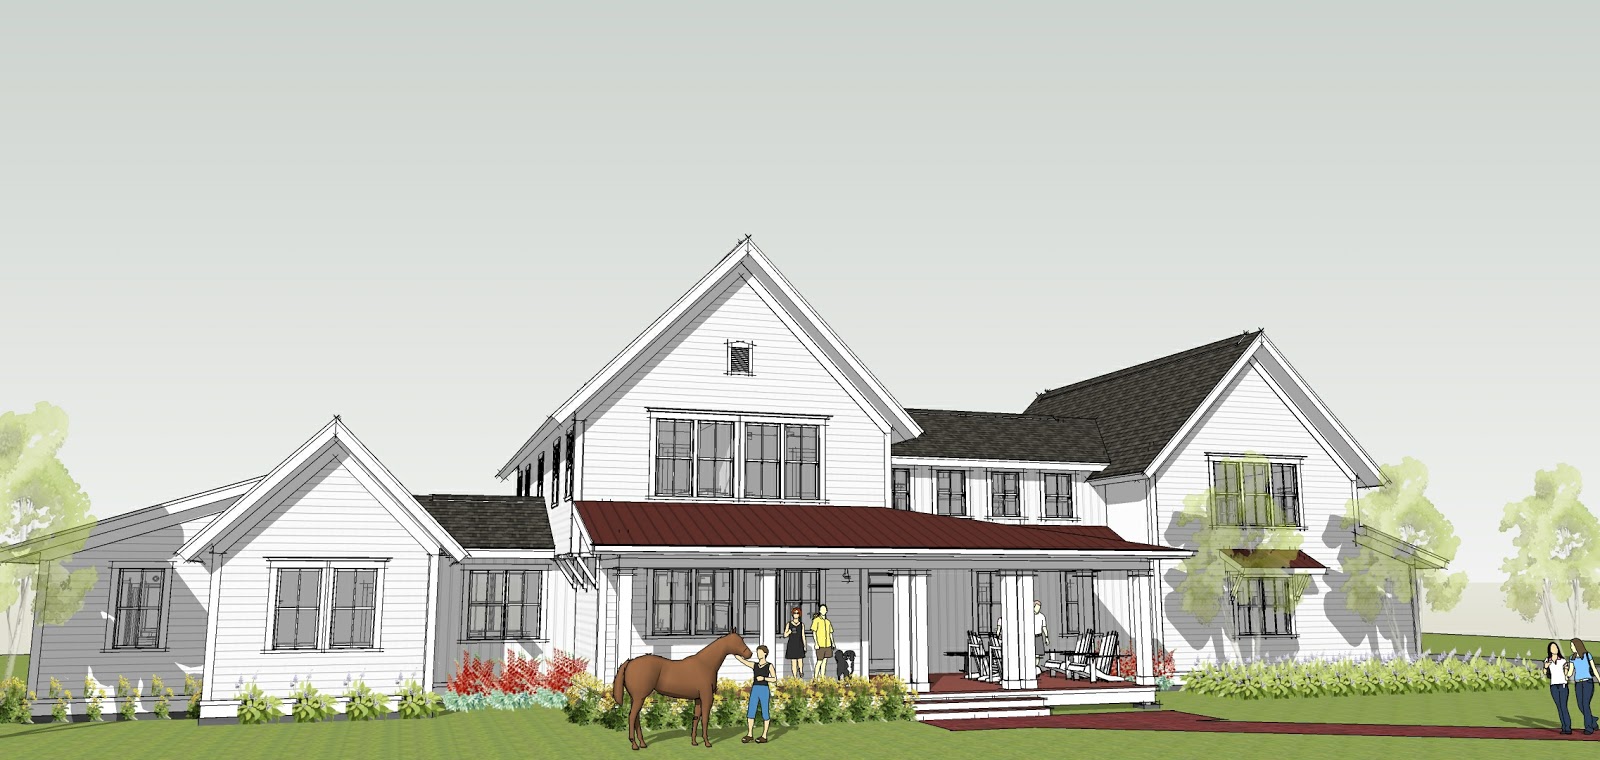 ron brenner architects New Modern  Farmhouse  Design  Completed